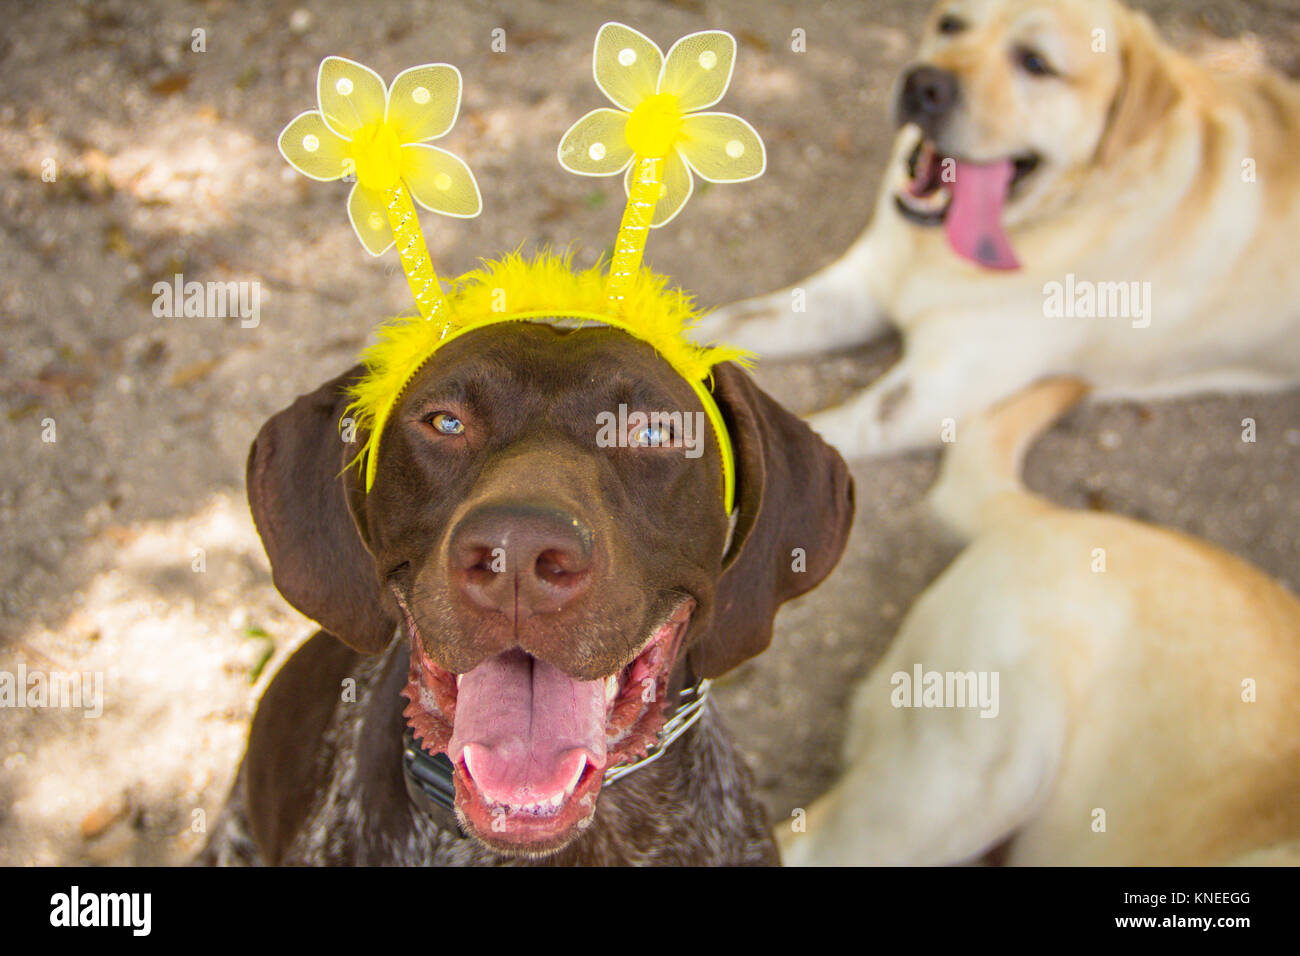 German shorthaired pointer dog wearing a headband Stock Photo